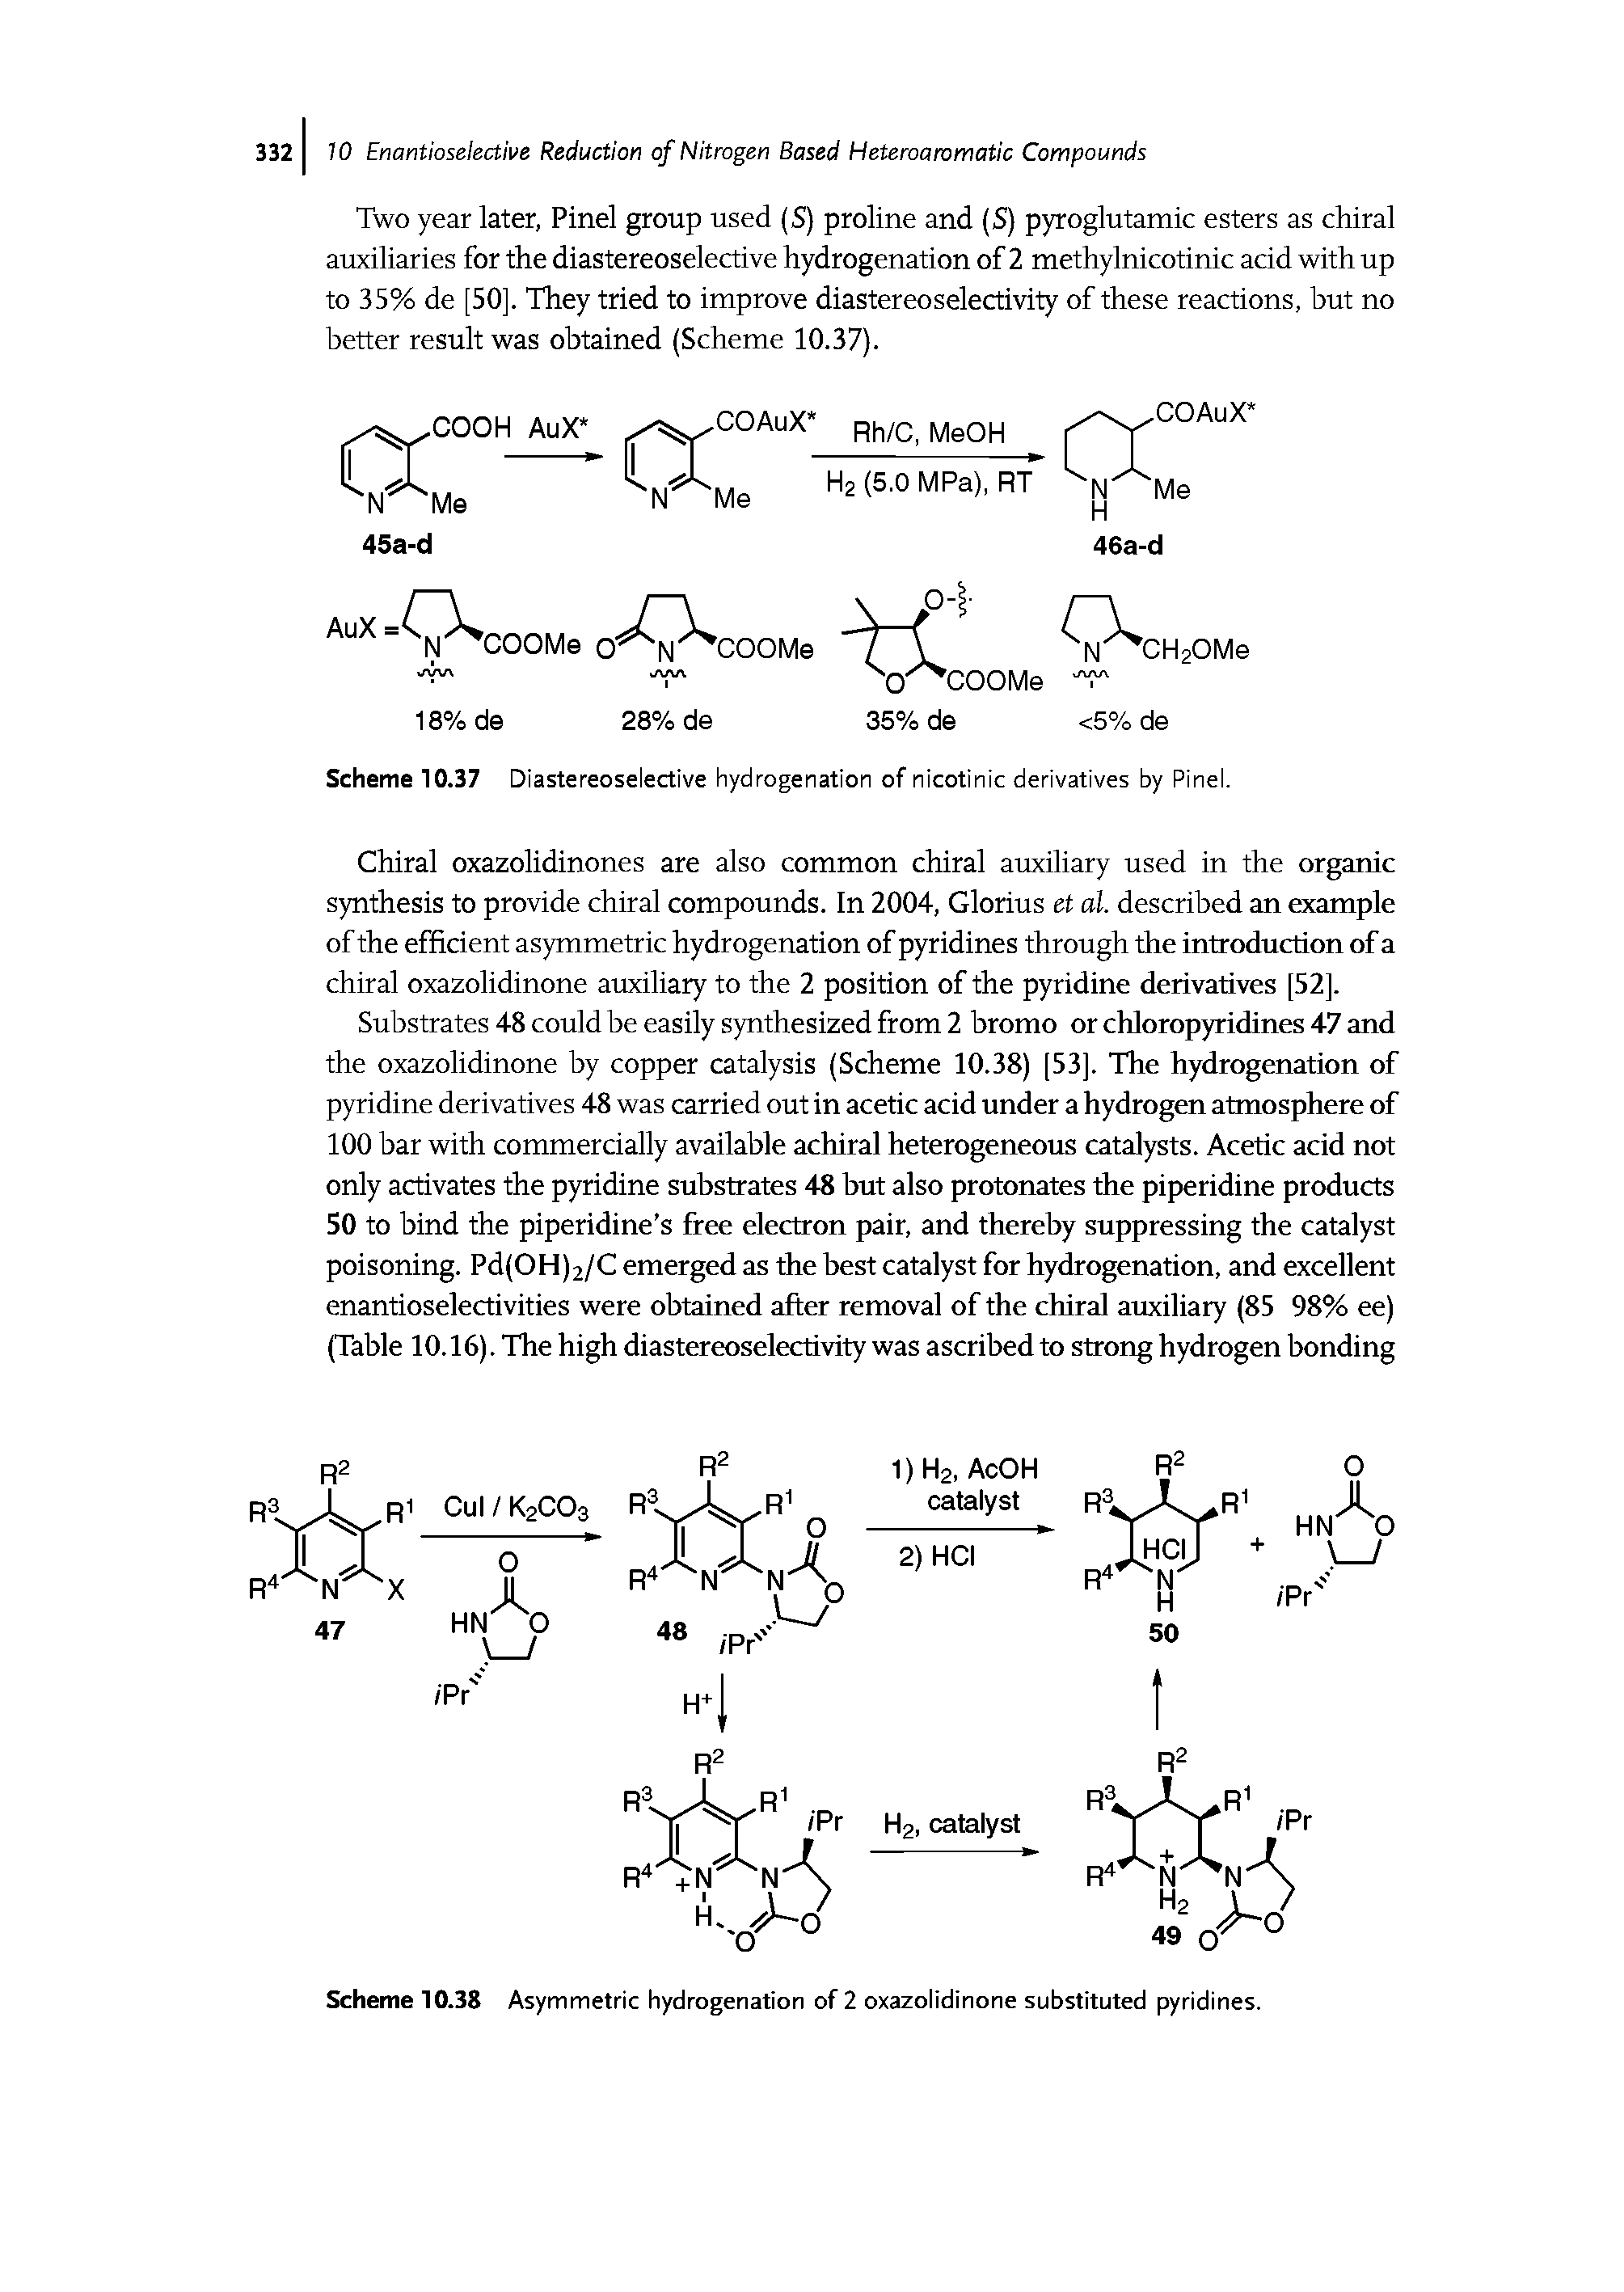 Scheme 10.37 Diastereoselective hydrogenation of nicotinic derivatives by Pinel.